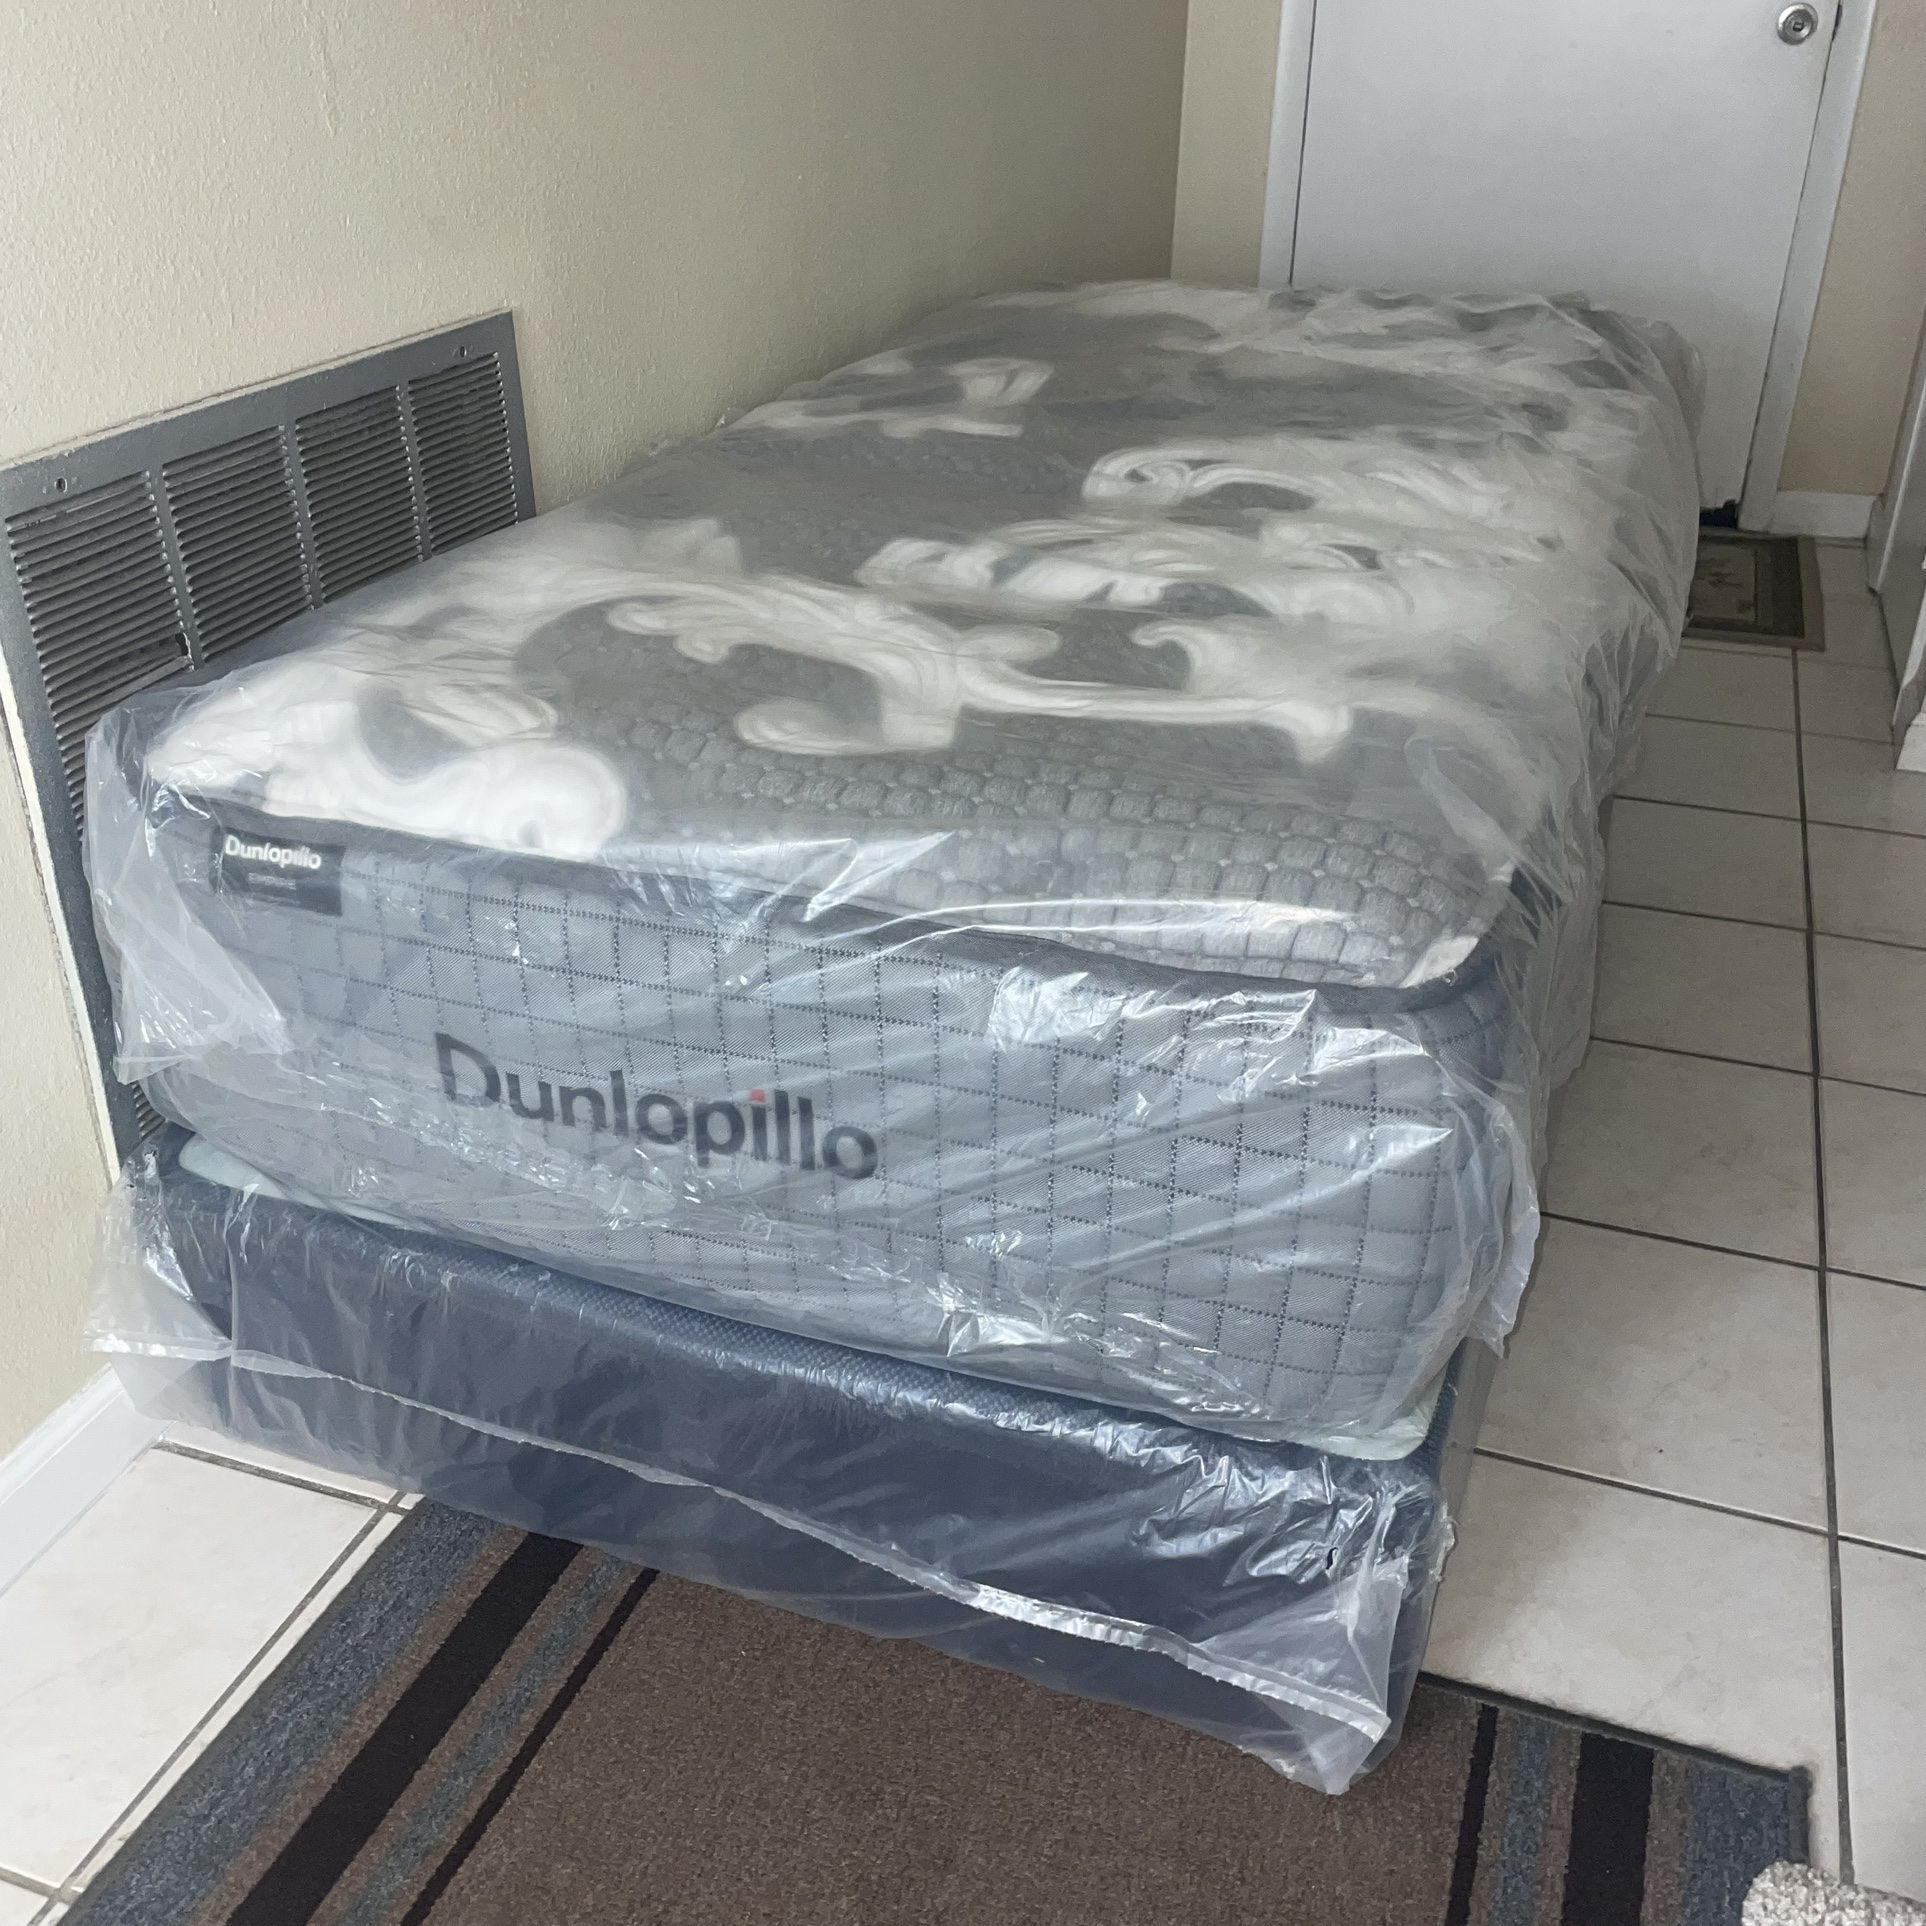 New Twin XL Mattress Set! FREE SAME DAY DELIVERY 